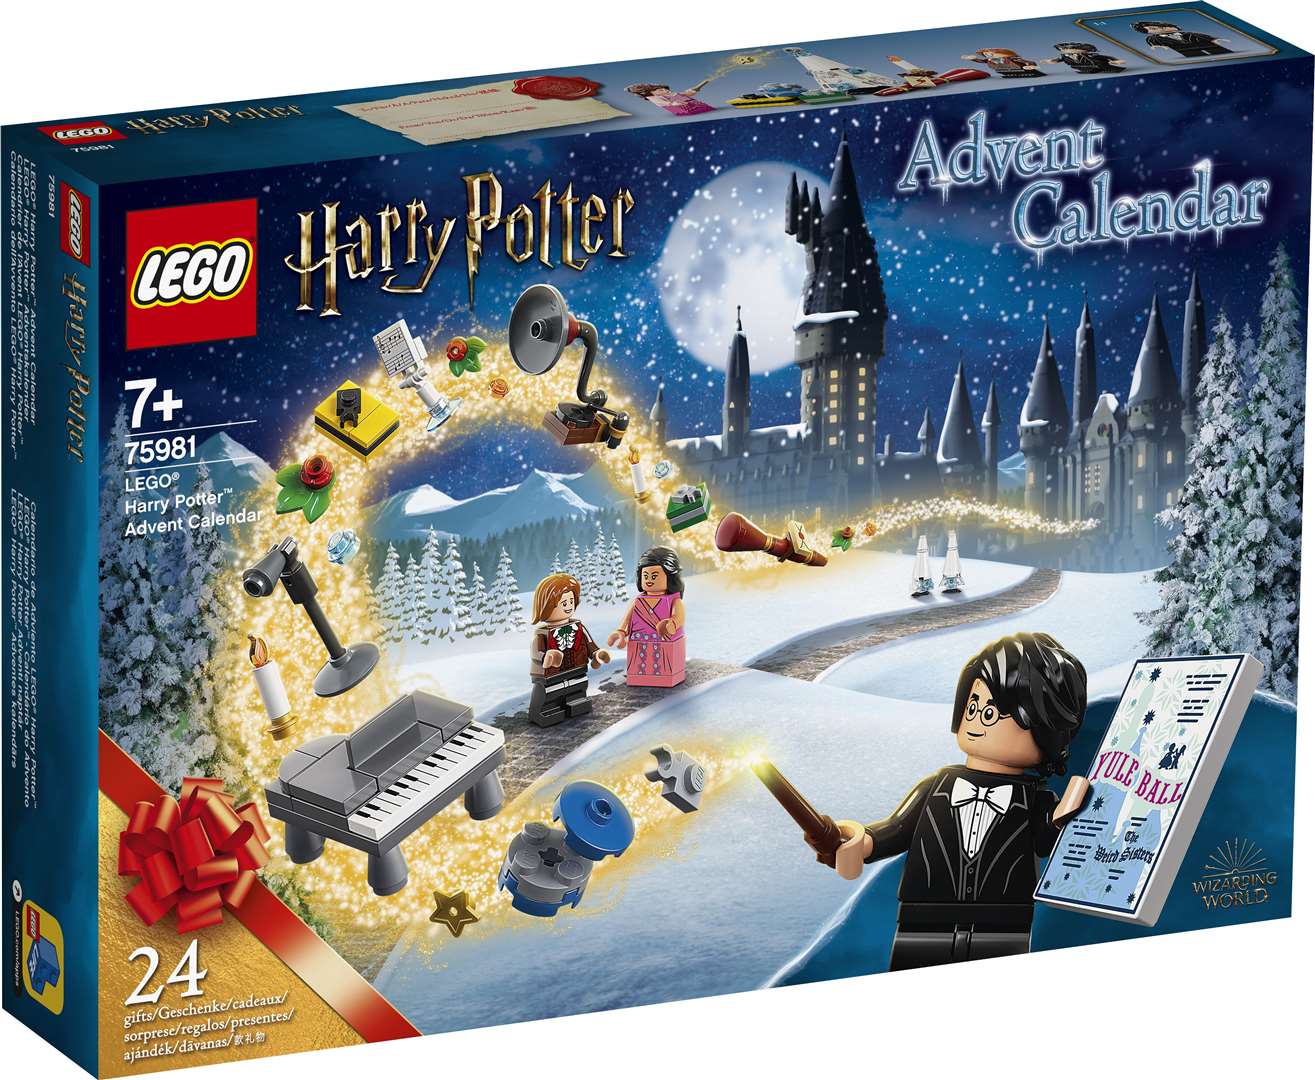 LEGO has once again released a Harry Potter themed calendar